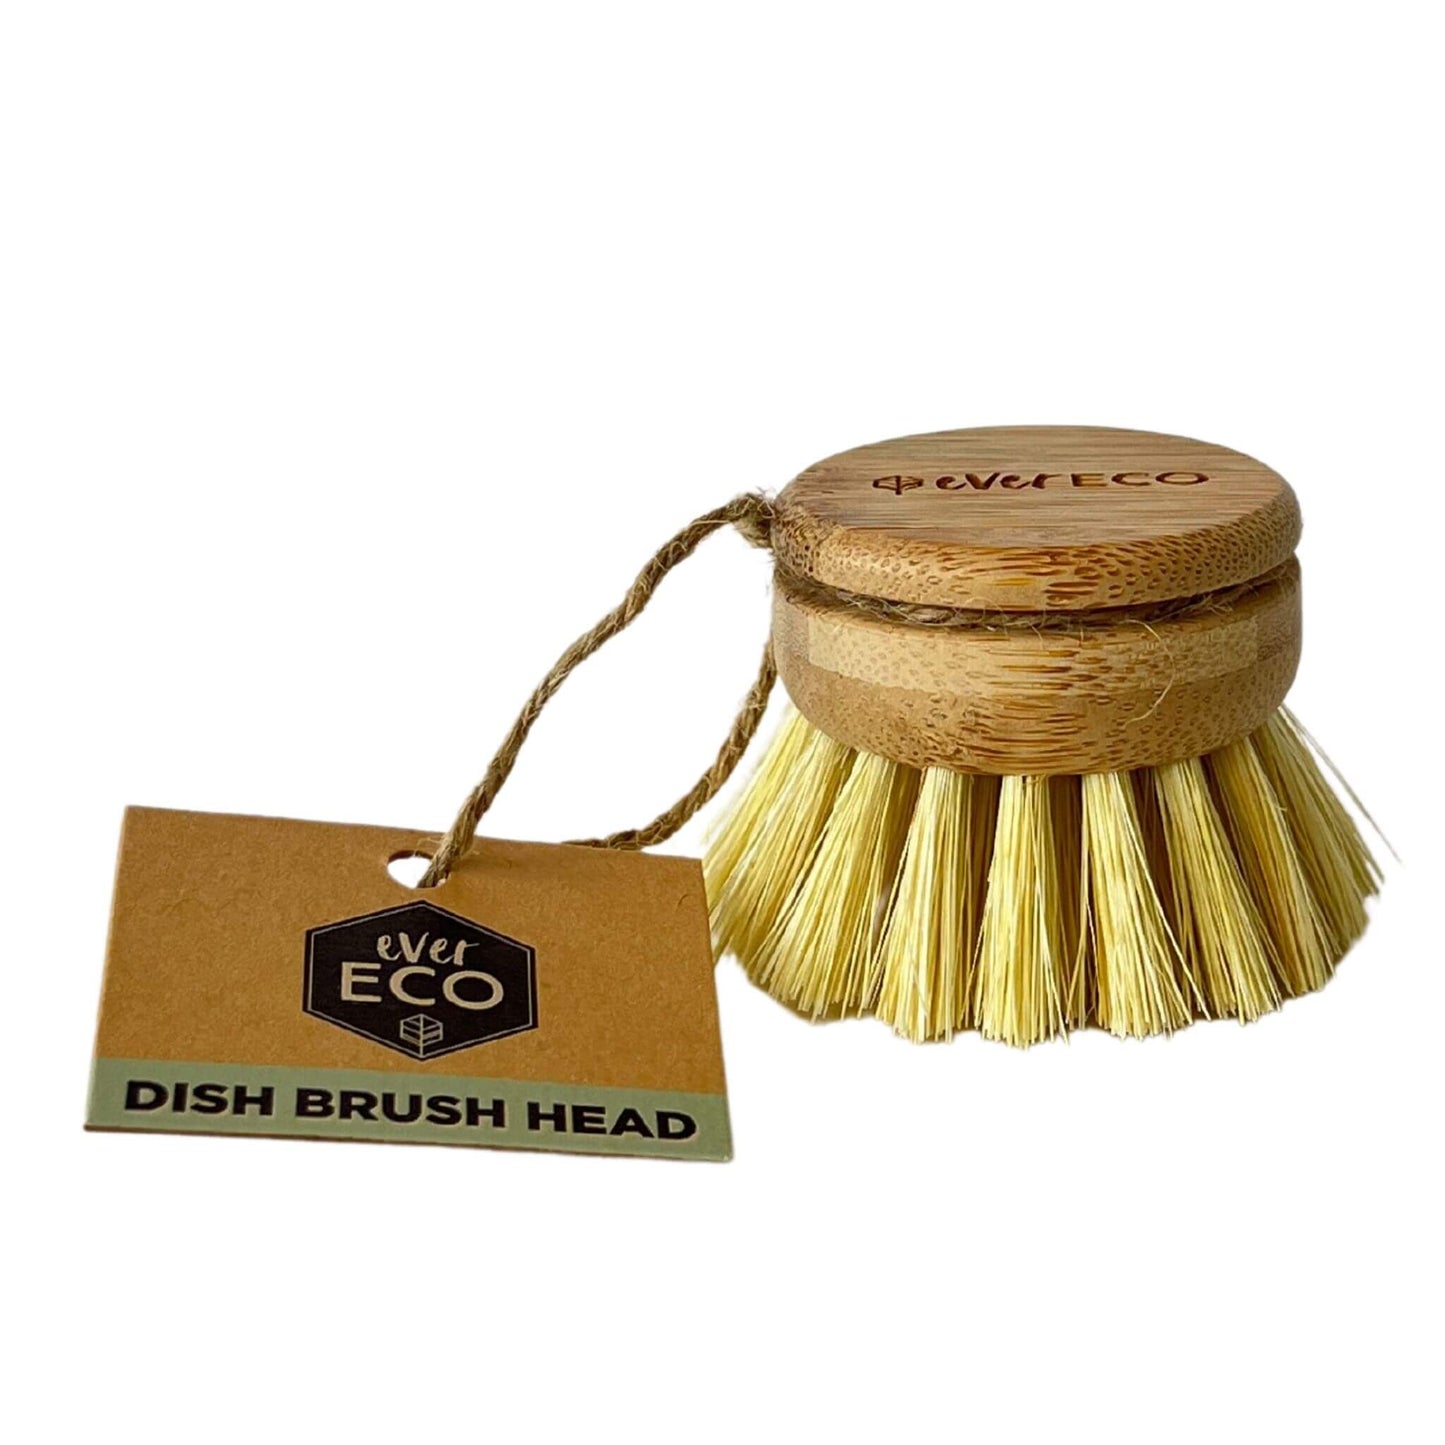 Ever Eco Dish Brush Replacement Head with sisal bristles